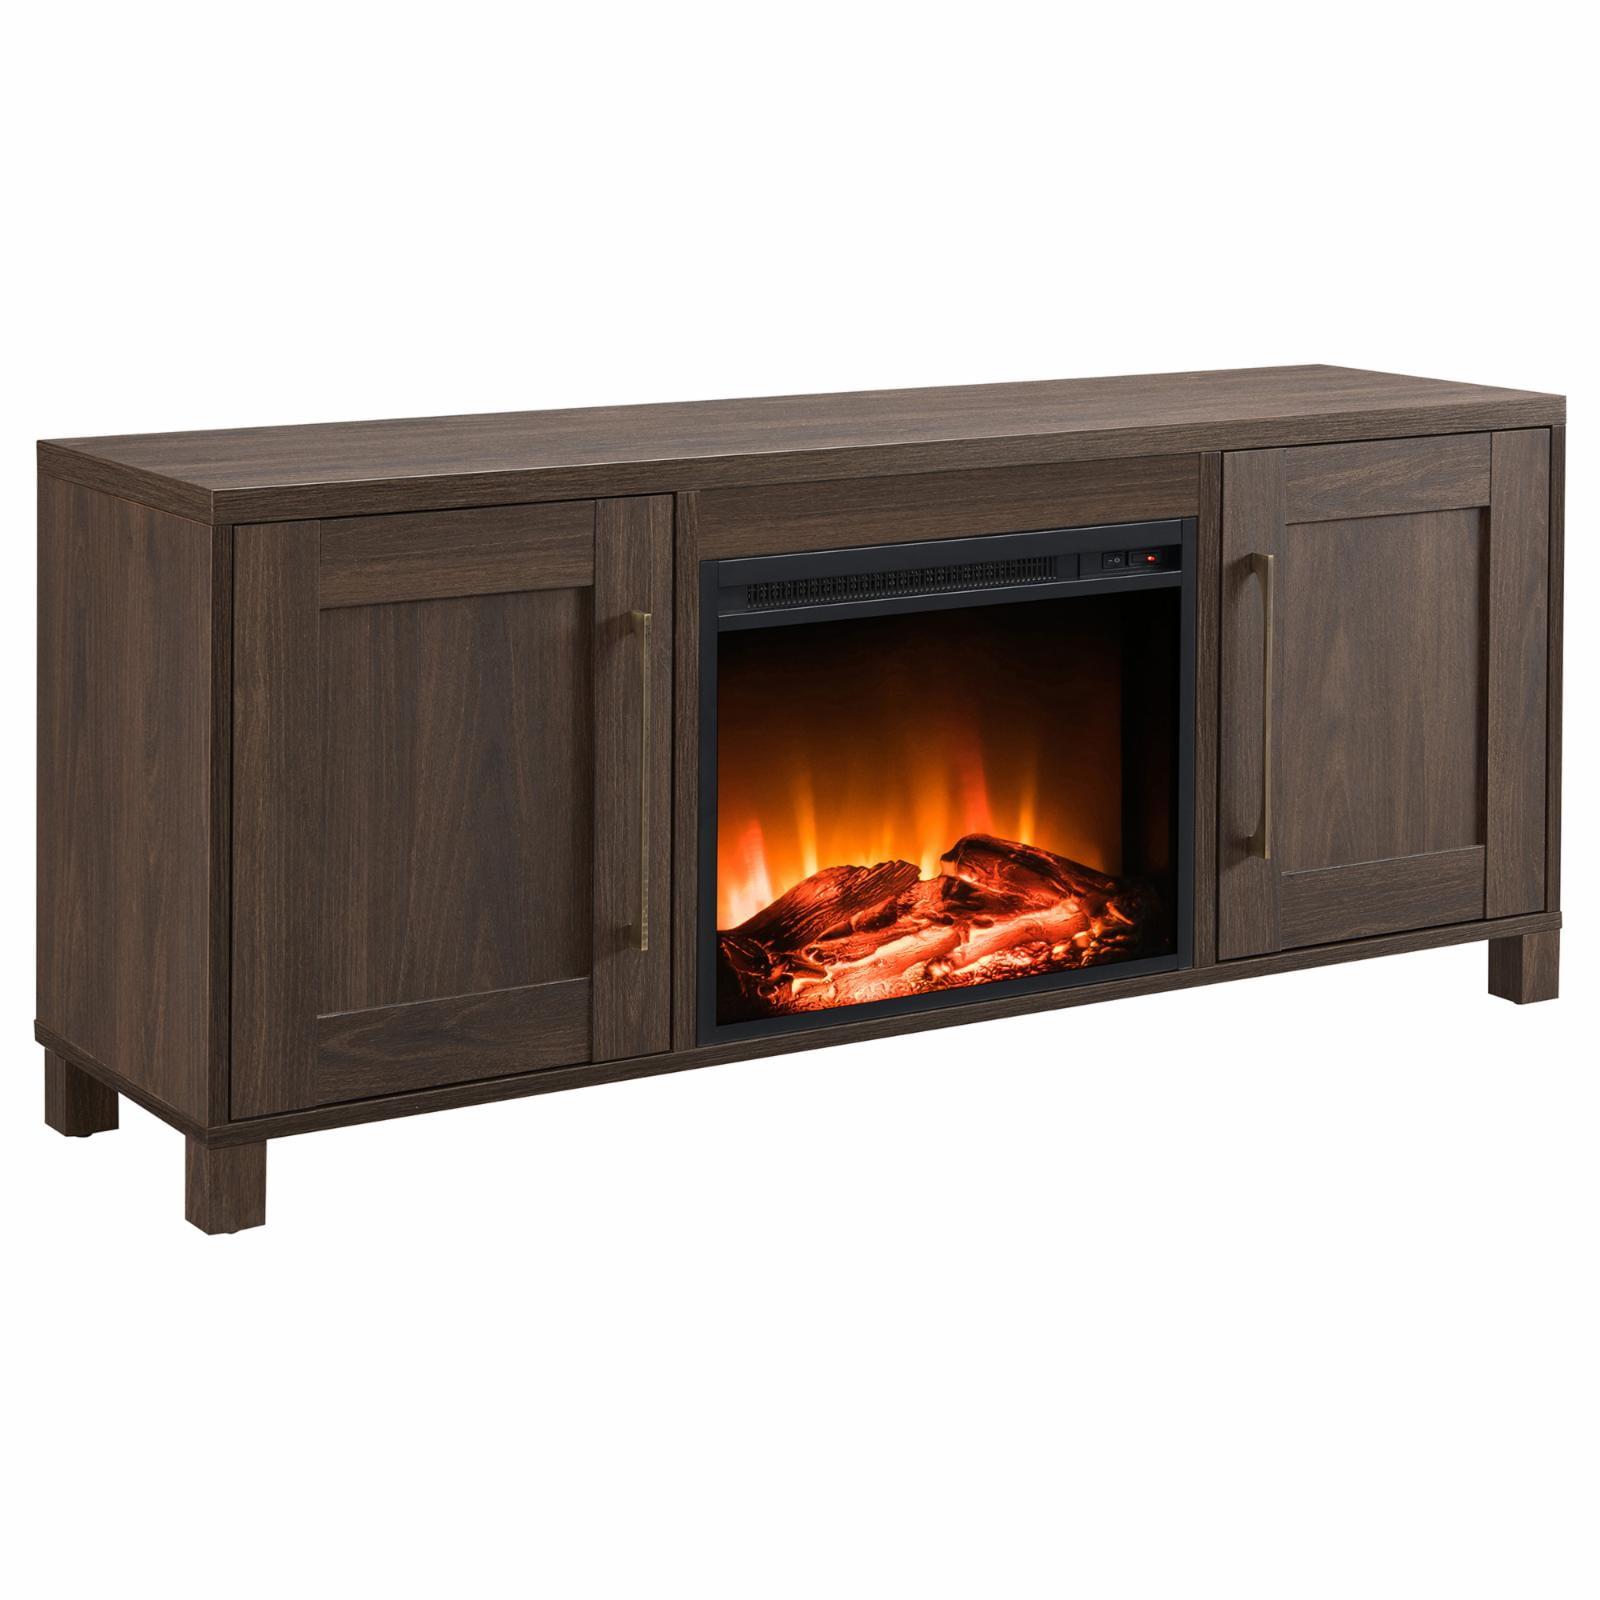 Alder Brown Transitional 58" TV Stand with Electric Fireplace and Cabinets